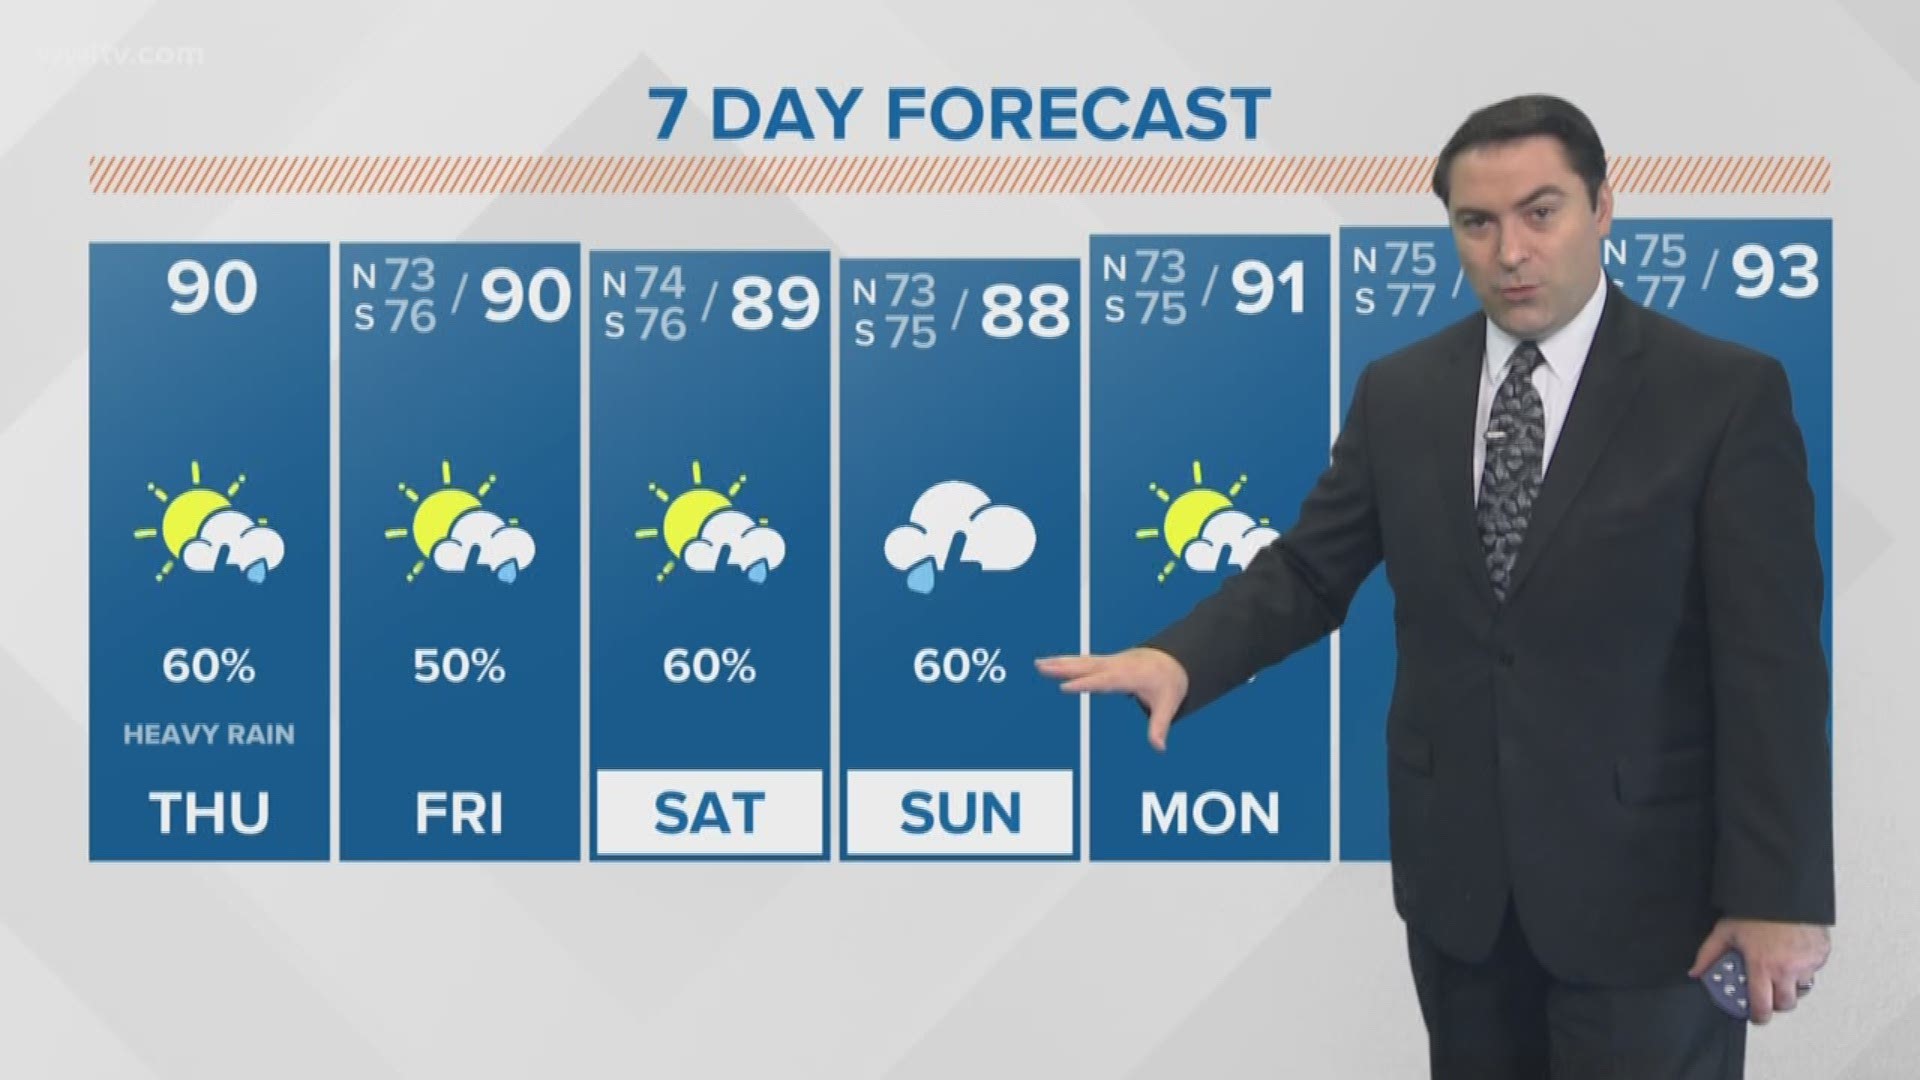 Meteorologist Dave Nussbaum says we will be hot with more scattered storms today as an upper-level low moves over us. A few storms could be strong to severe.